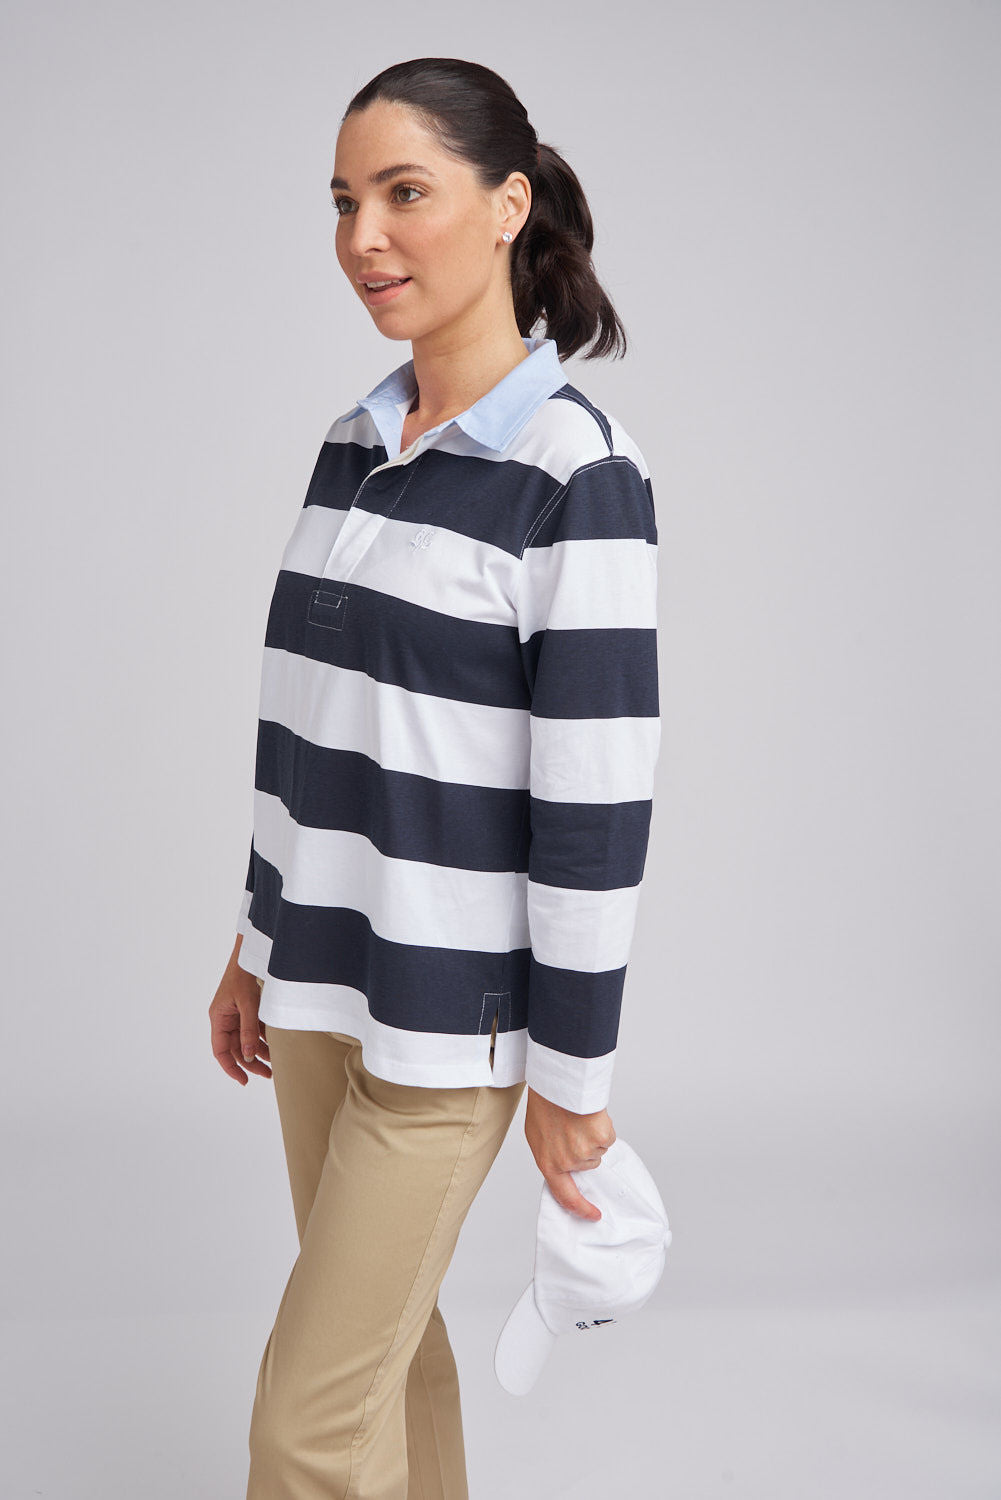 Goondiwindi Cotton - Relaxed Rugby Top White/Navy | G3286